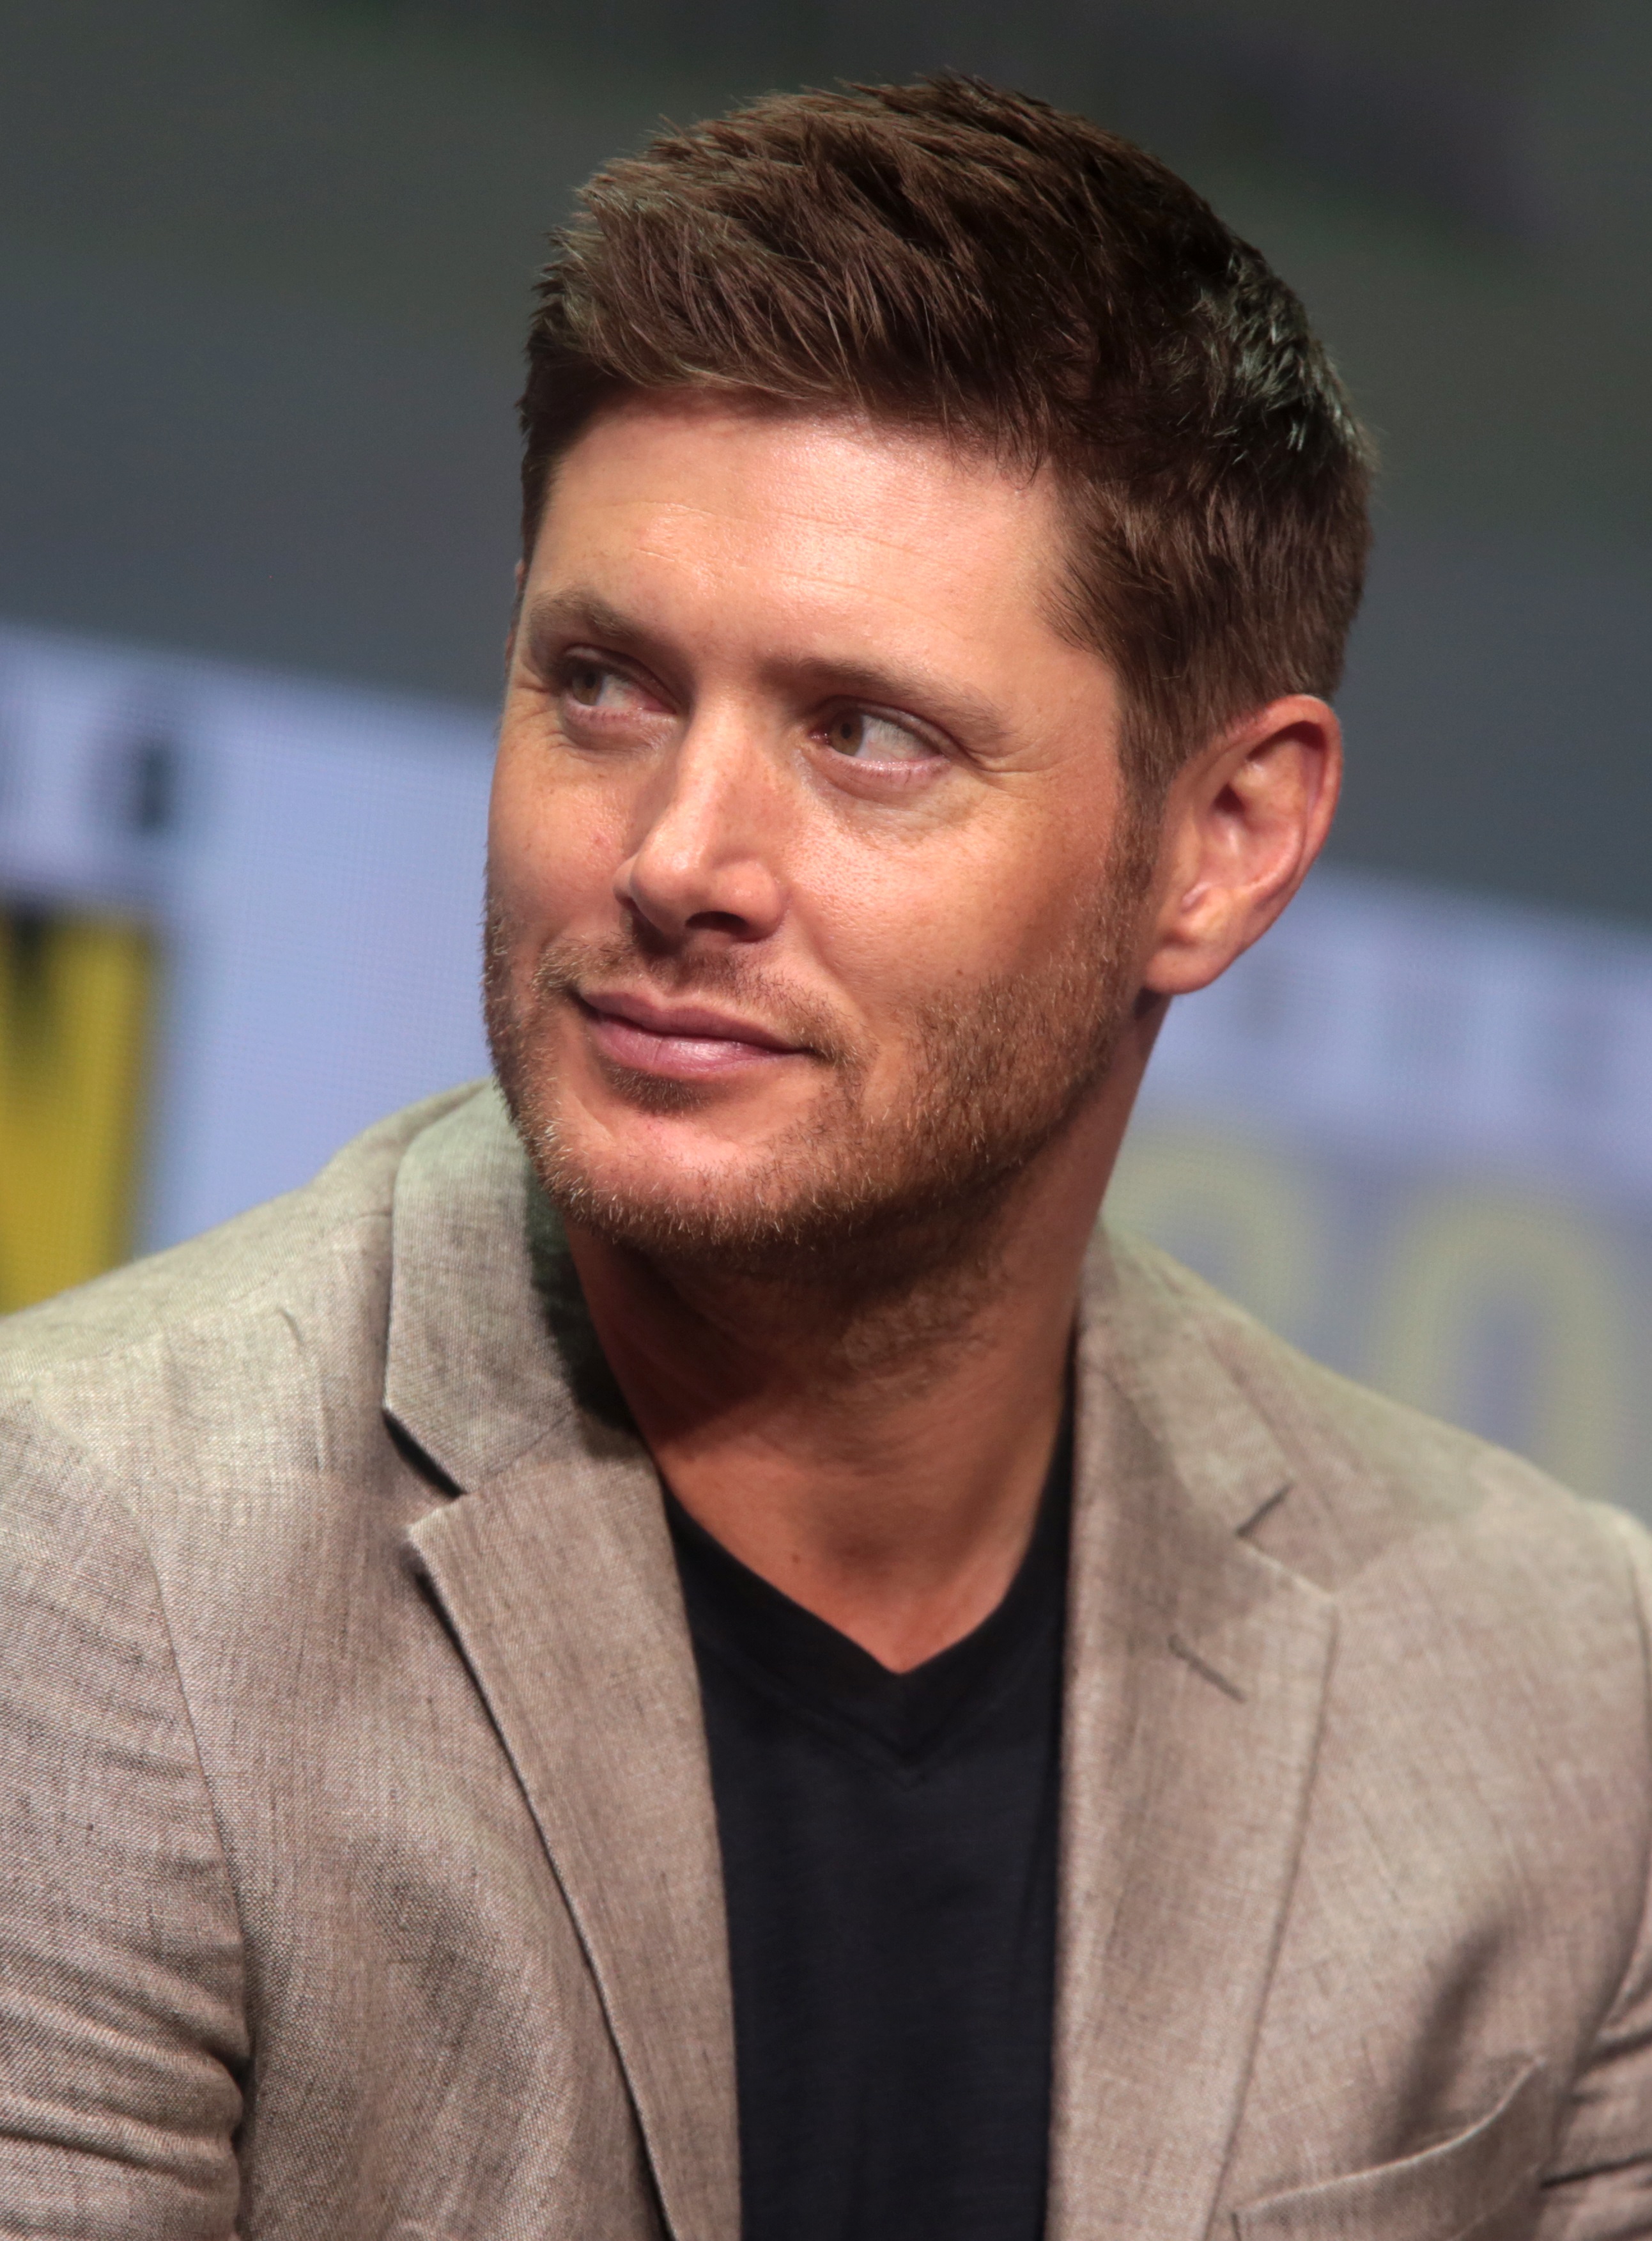 Jensen Ross Ackles is an American actor, producer and director. He is best known for his portrayal of Dean Winchester in The CW horror fantasy series Supernatural and has appeared in television shows such as Days of Our Lives as Eric Brady, Alec/X5-494 in Dark Angel and Jason Teague in Smallville.